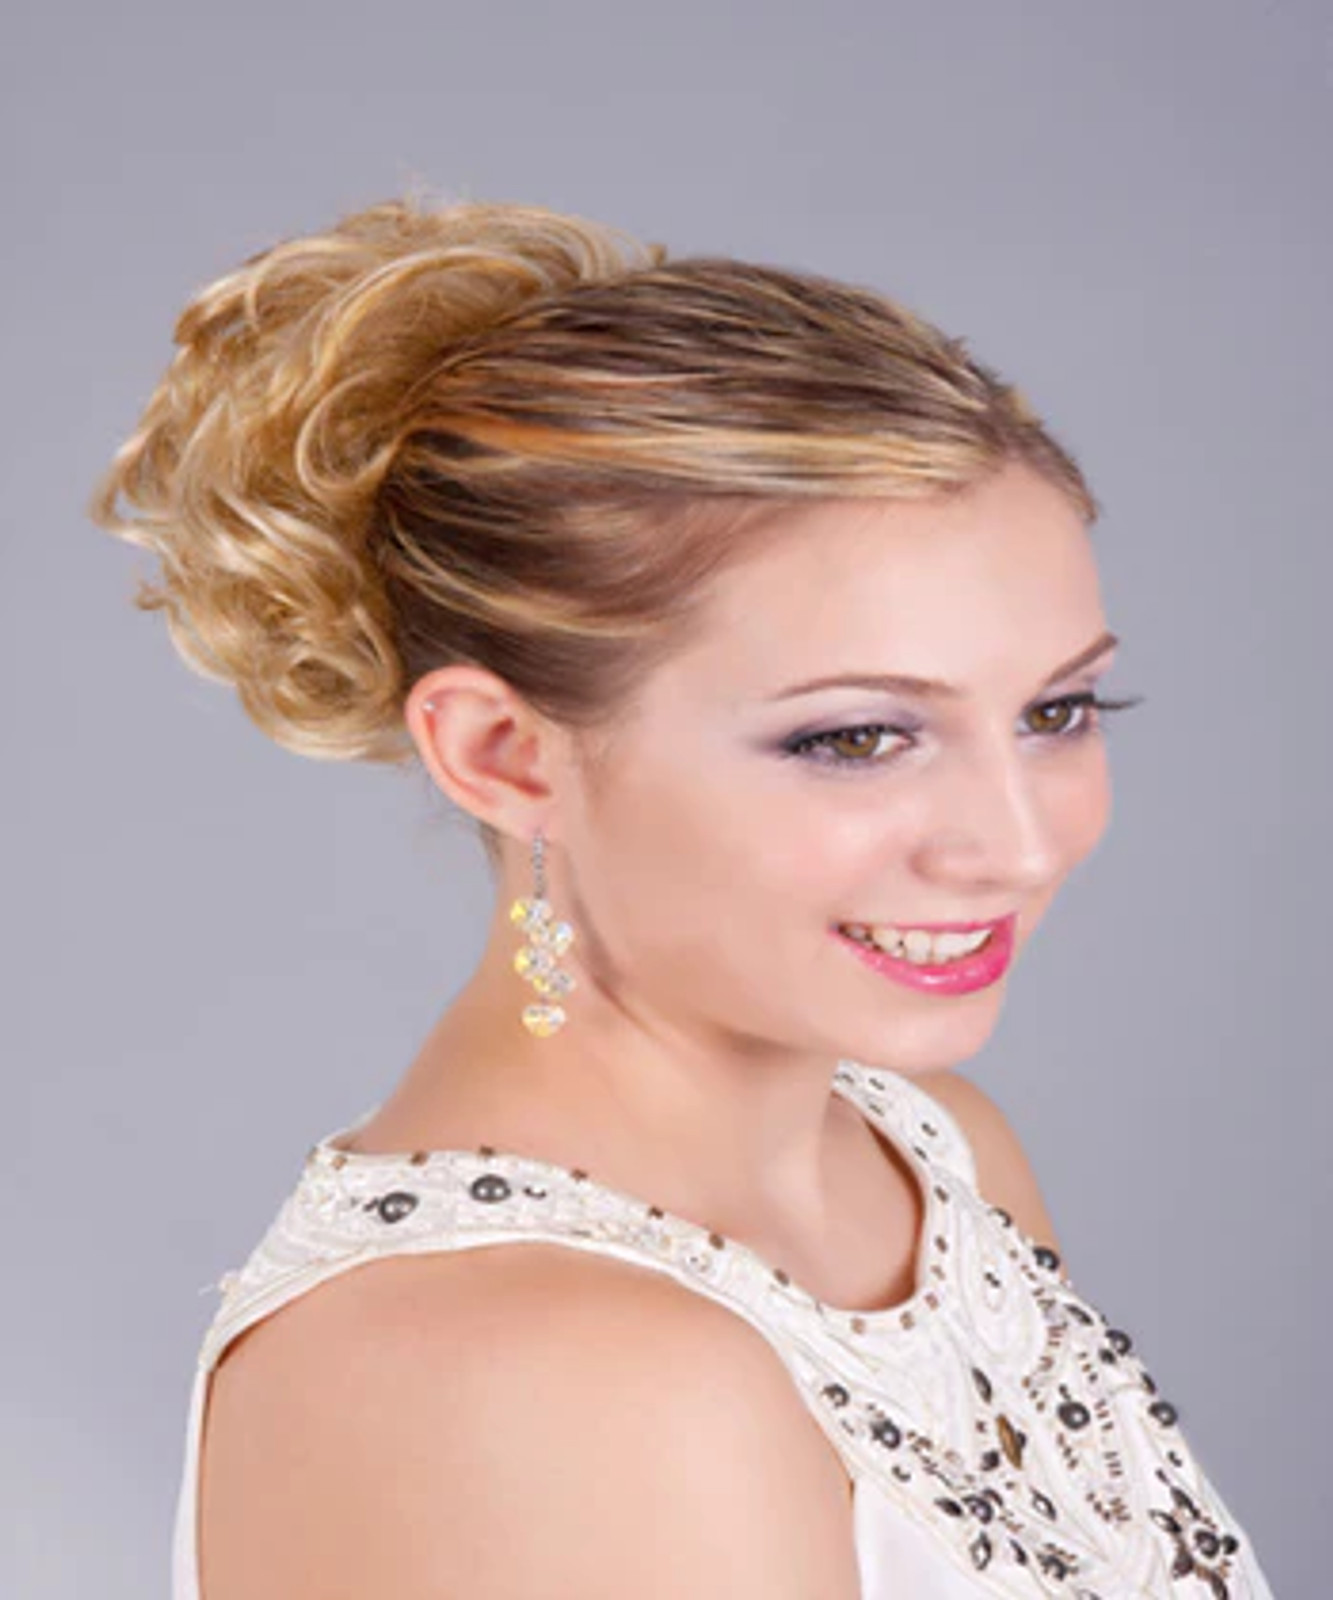 4 Ways to Put Your Hair Up with a Jaw Clip - wikiHow